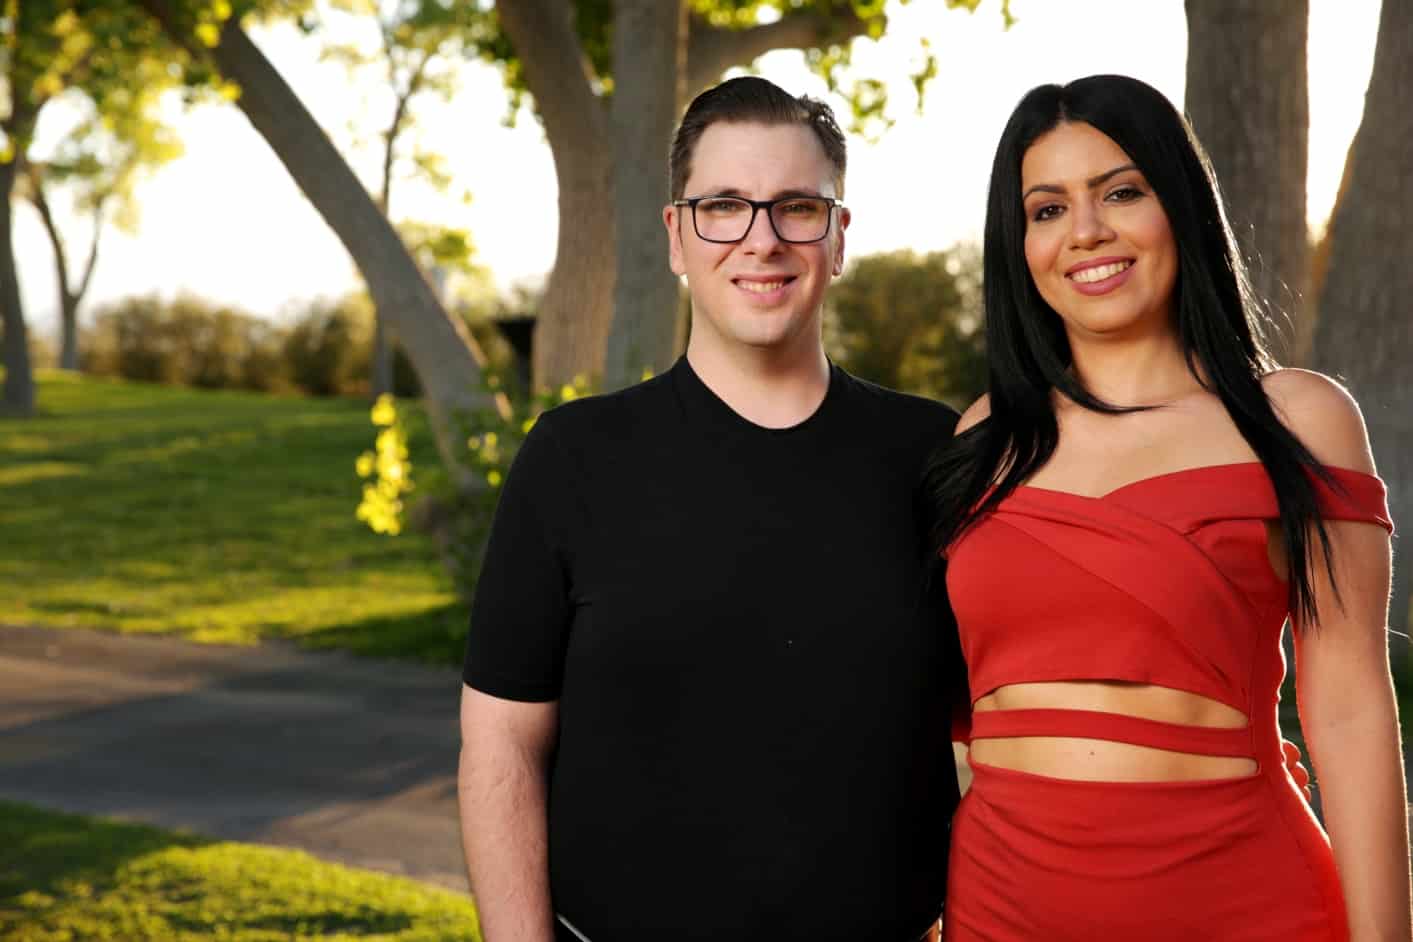 90 Day Fiance Larissa Dos Santos Lima Says Marriage to Colt Johnson Is Over